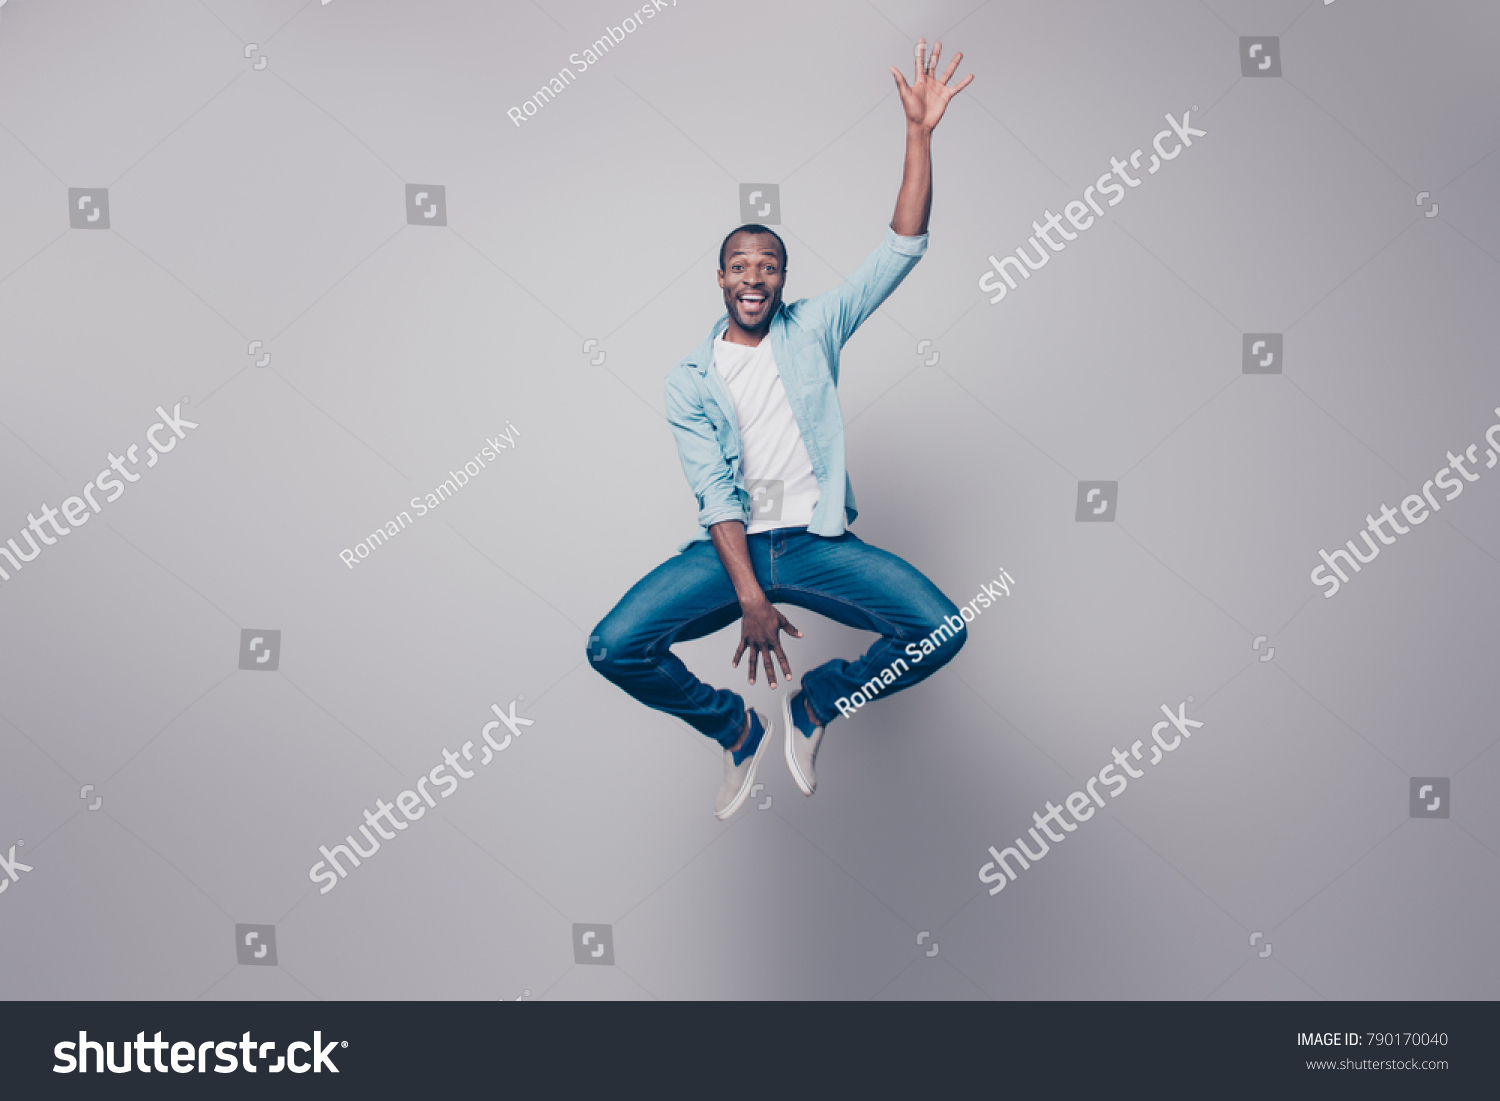 Full-size full-length portrait of cheerful handsome joyful excited delightful impressed surprised afro guy wearing casual denim jeans clothing jumping up, isolated on gray background #790170040